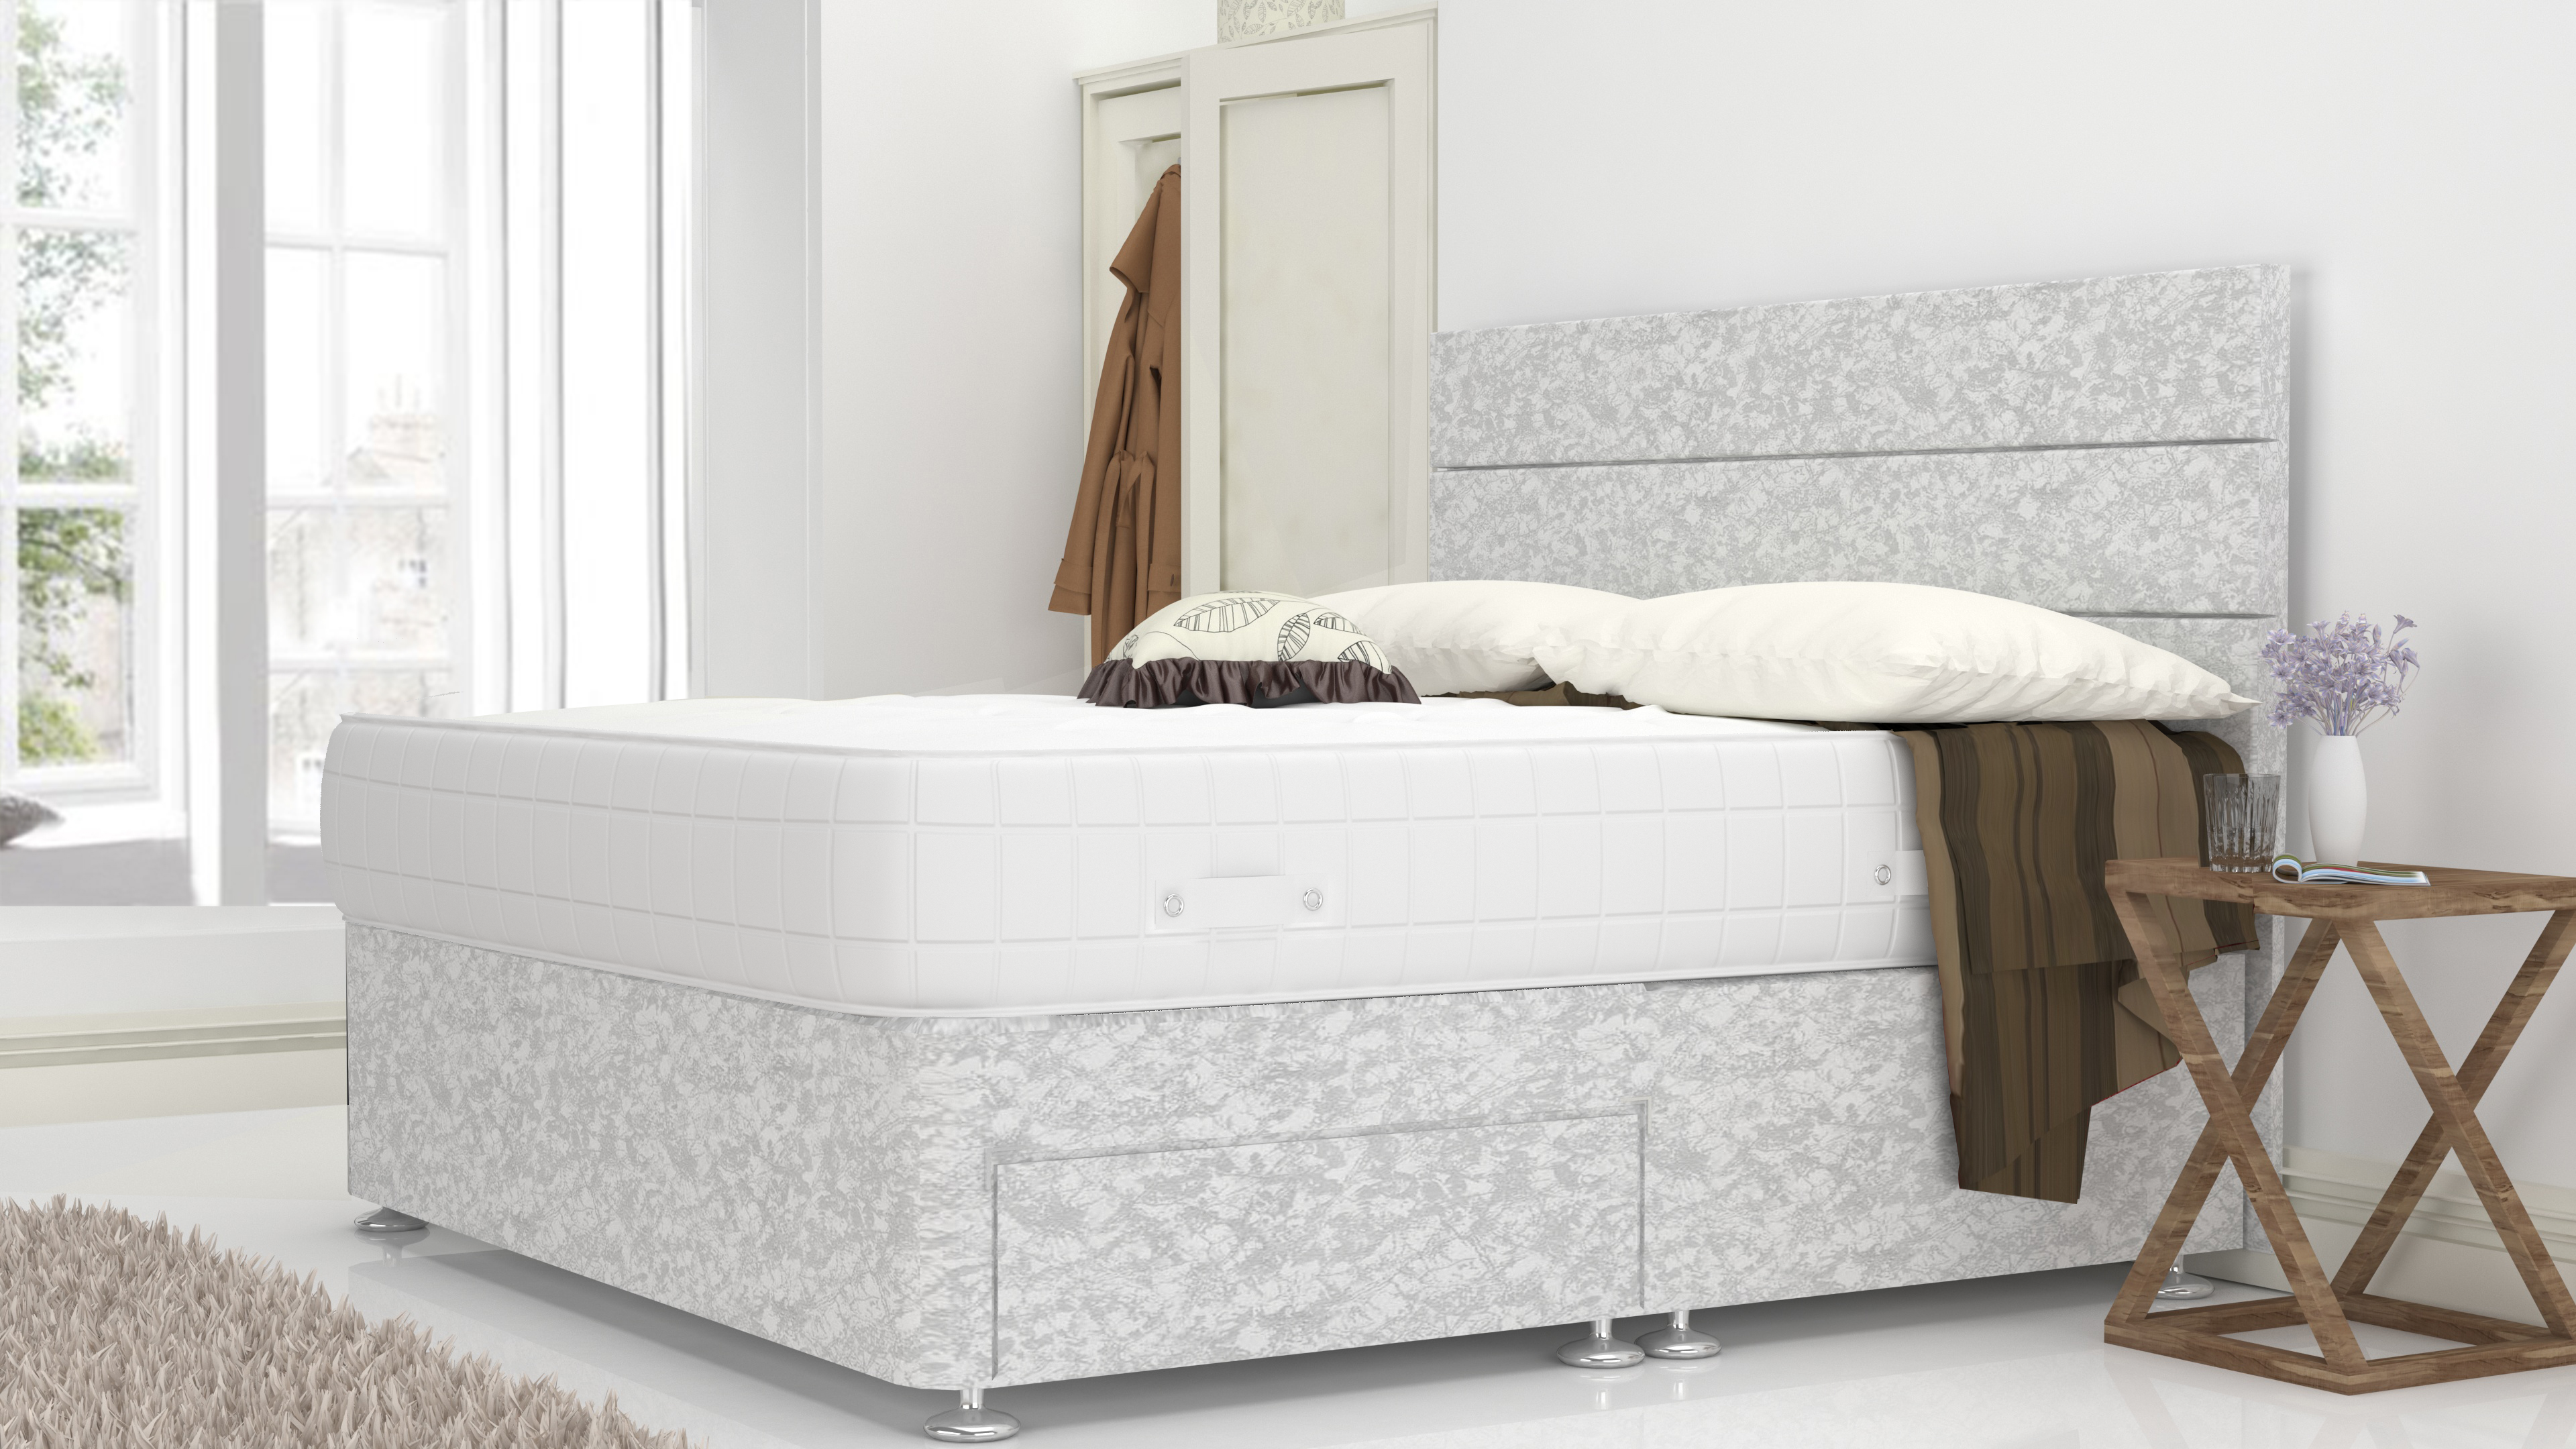 White Crushed Velvet 3 Feet Divan Bed With 3 Panel Headboard (Included Feet) And Free Pillow Top Mattress